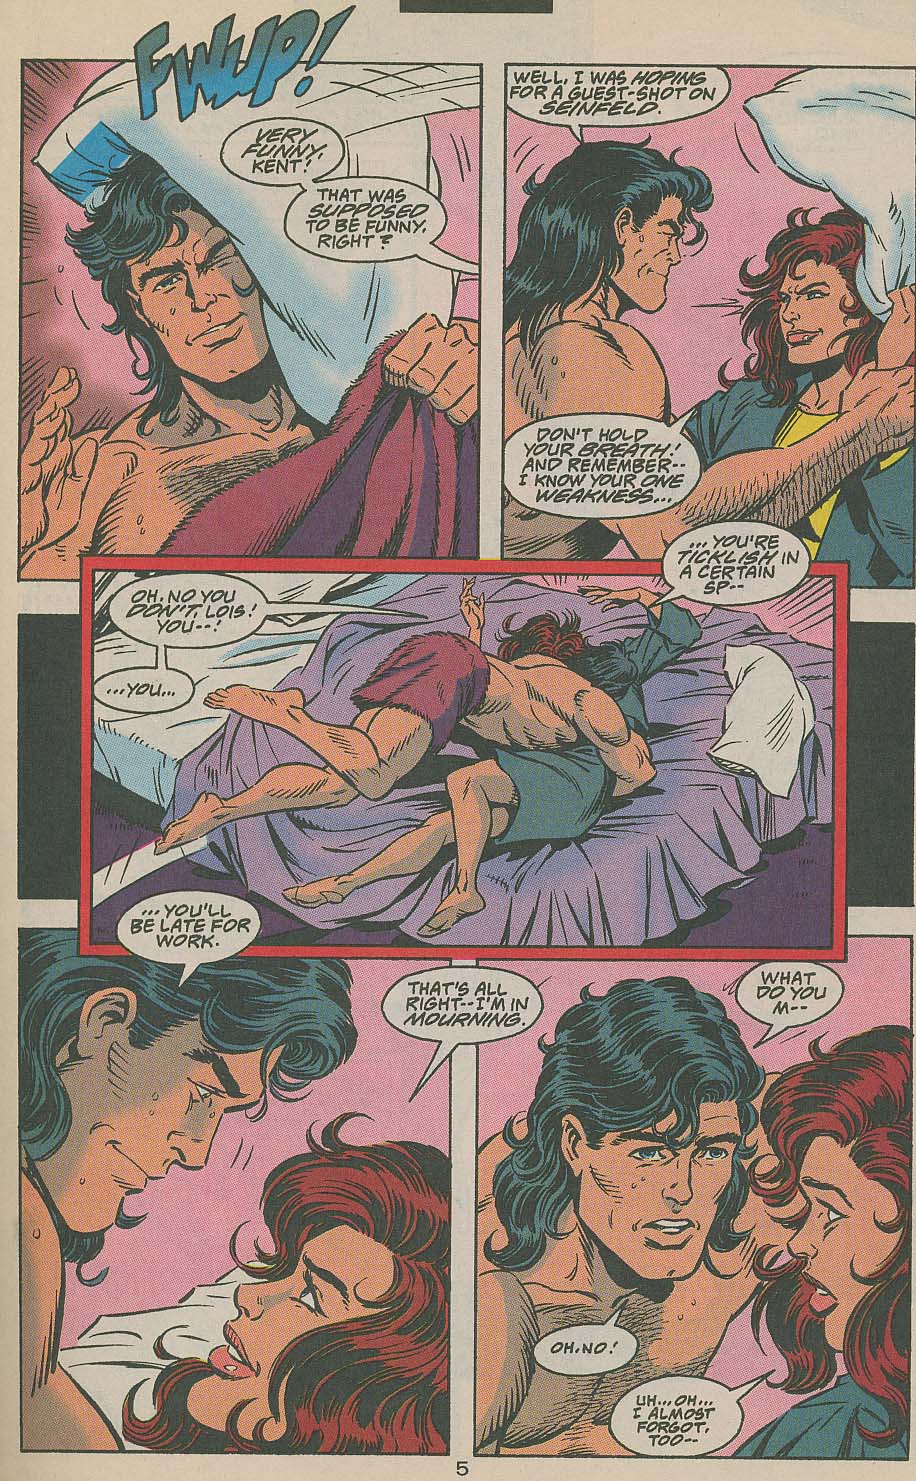 Adventures of Superman (1987) 505 Page 5